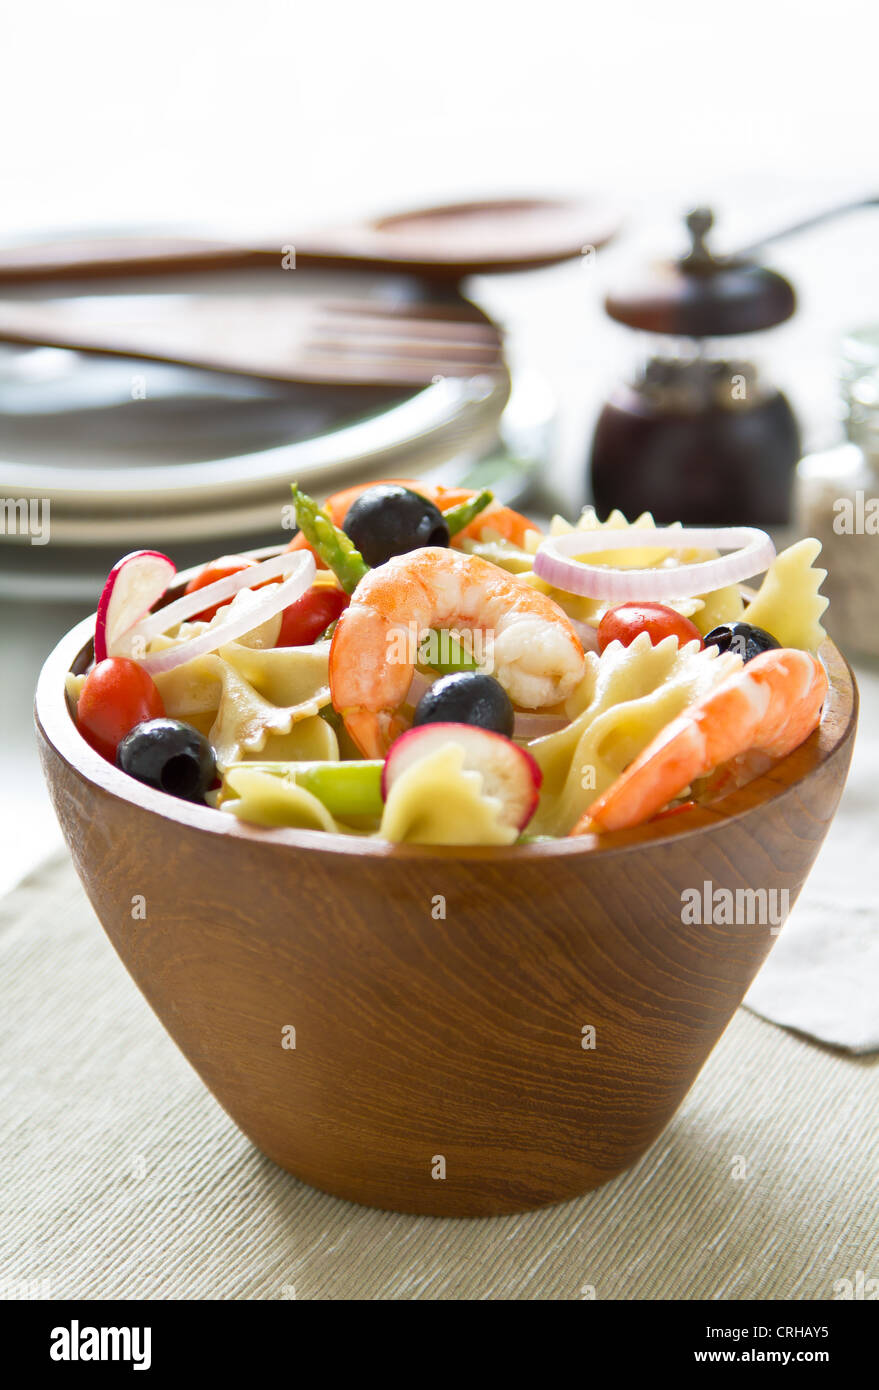 Pasta with prawn and asparagus salad Stock Photo